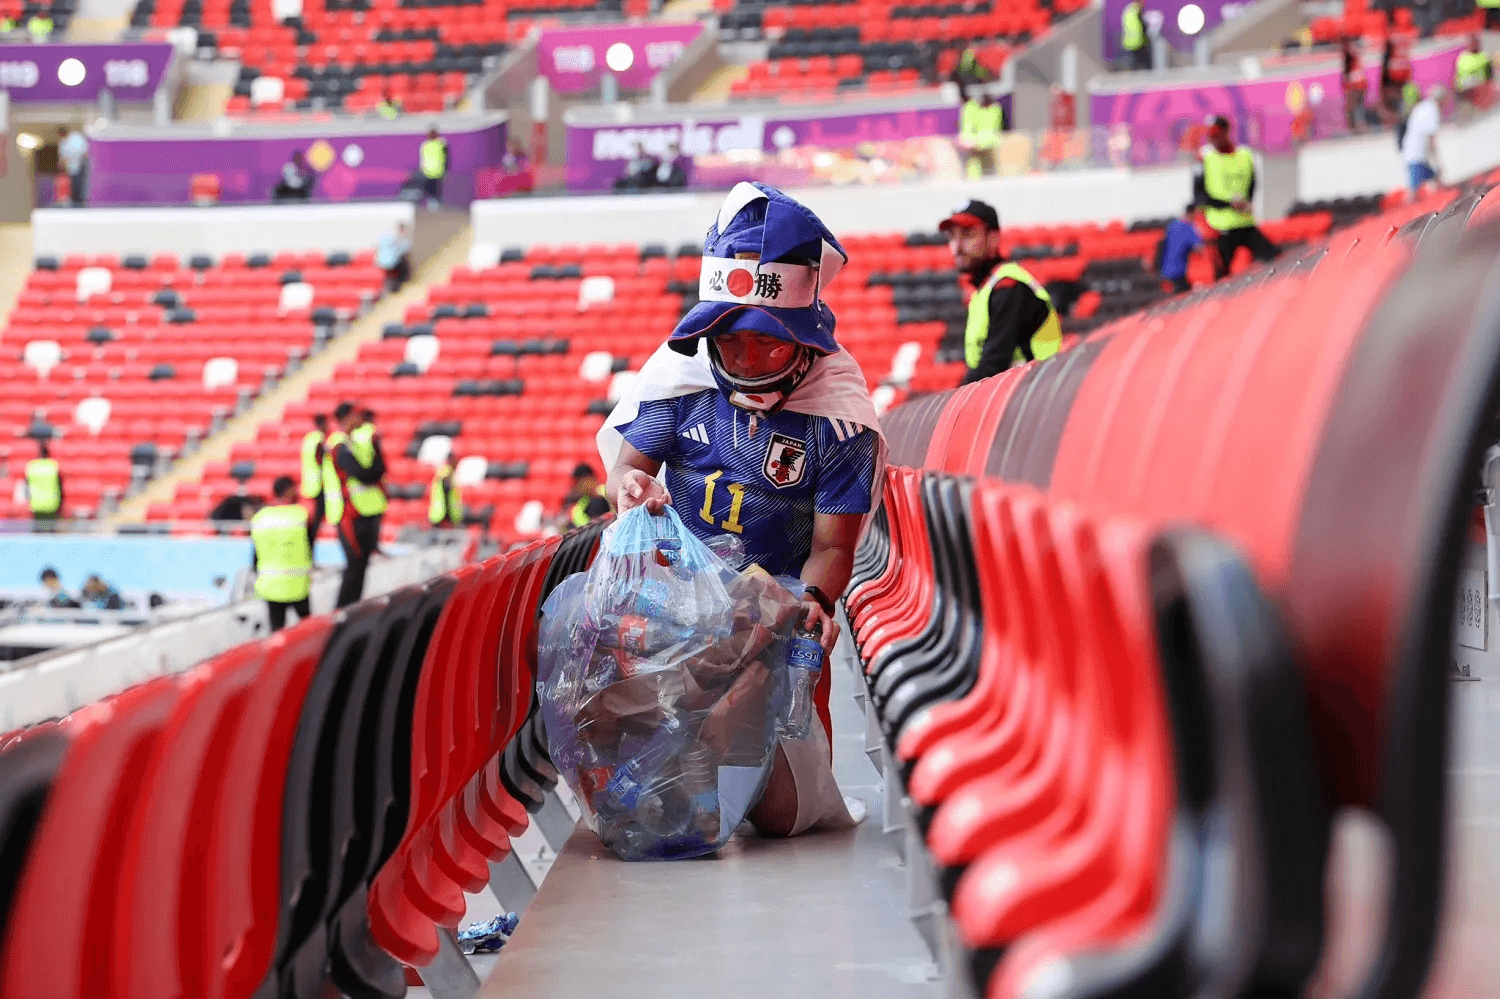 Japanese fans tidying up the stadium after a game